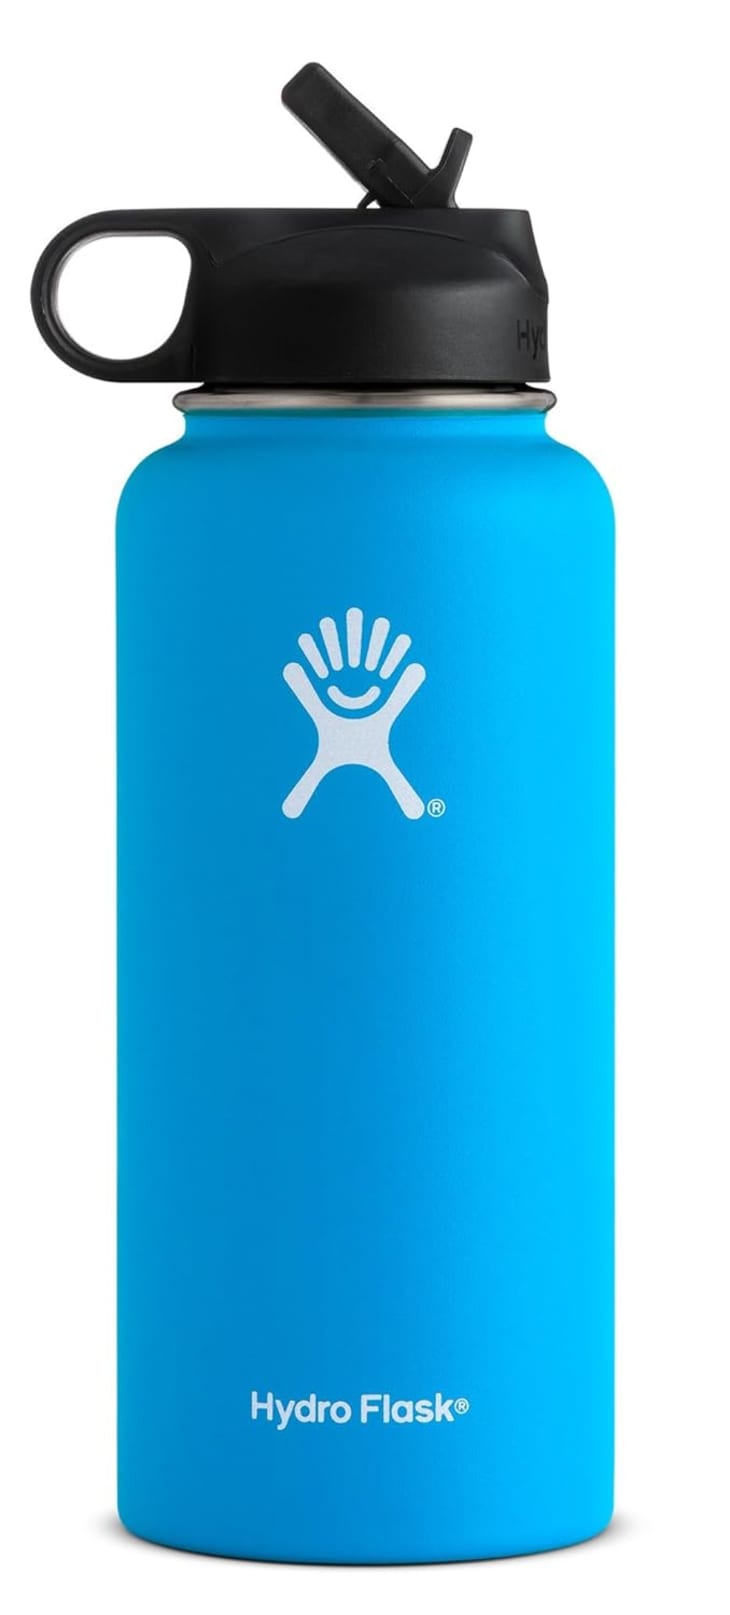 Hydro Flask Vacuum Insulated Stainless Steel Water Bottle at Amazon